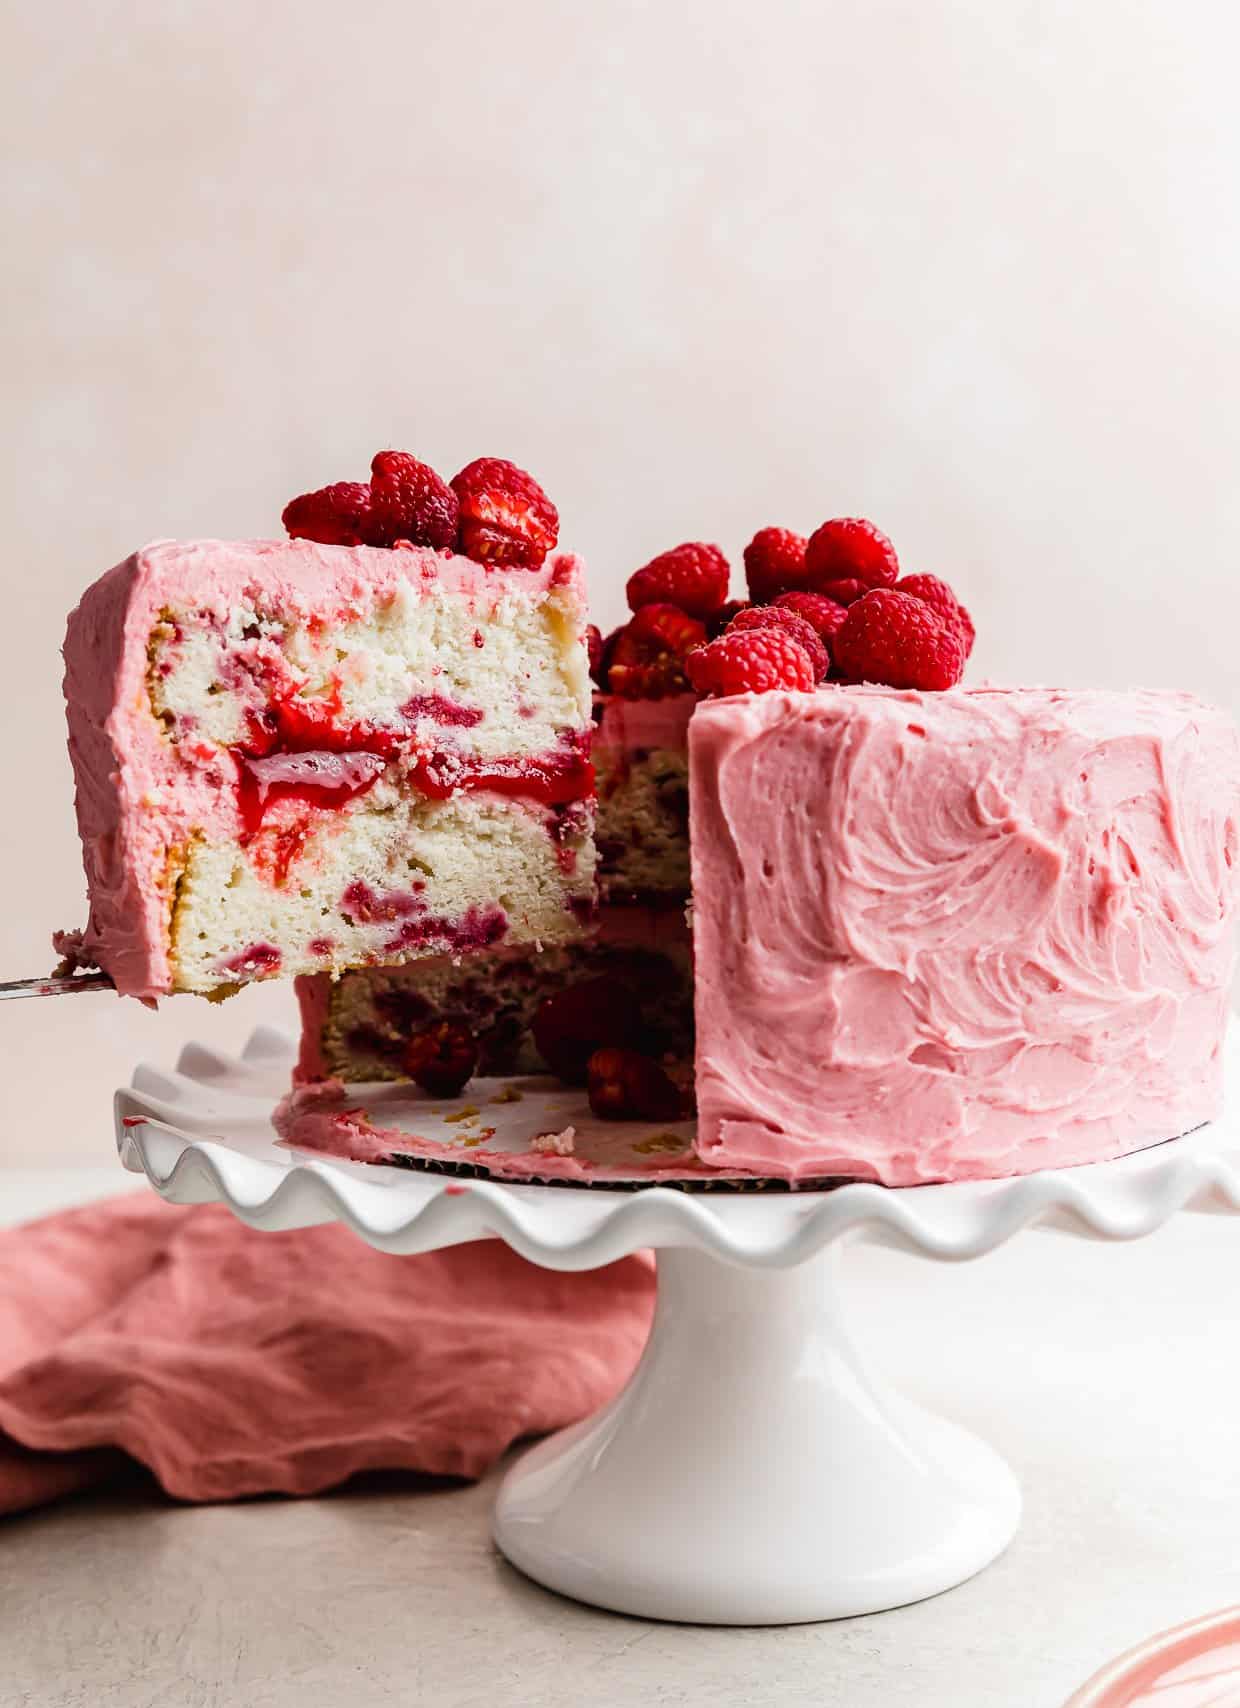 A slice of fresh Lemon Raspberry layer cake on a knife being lifted from the full cake.